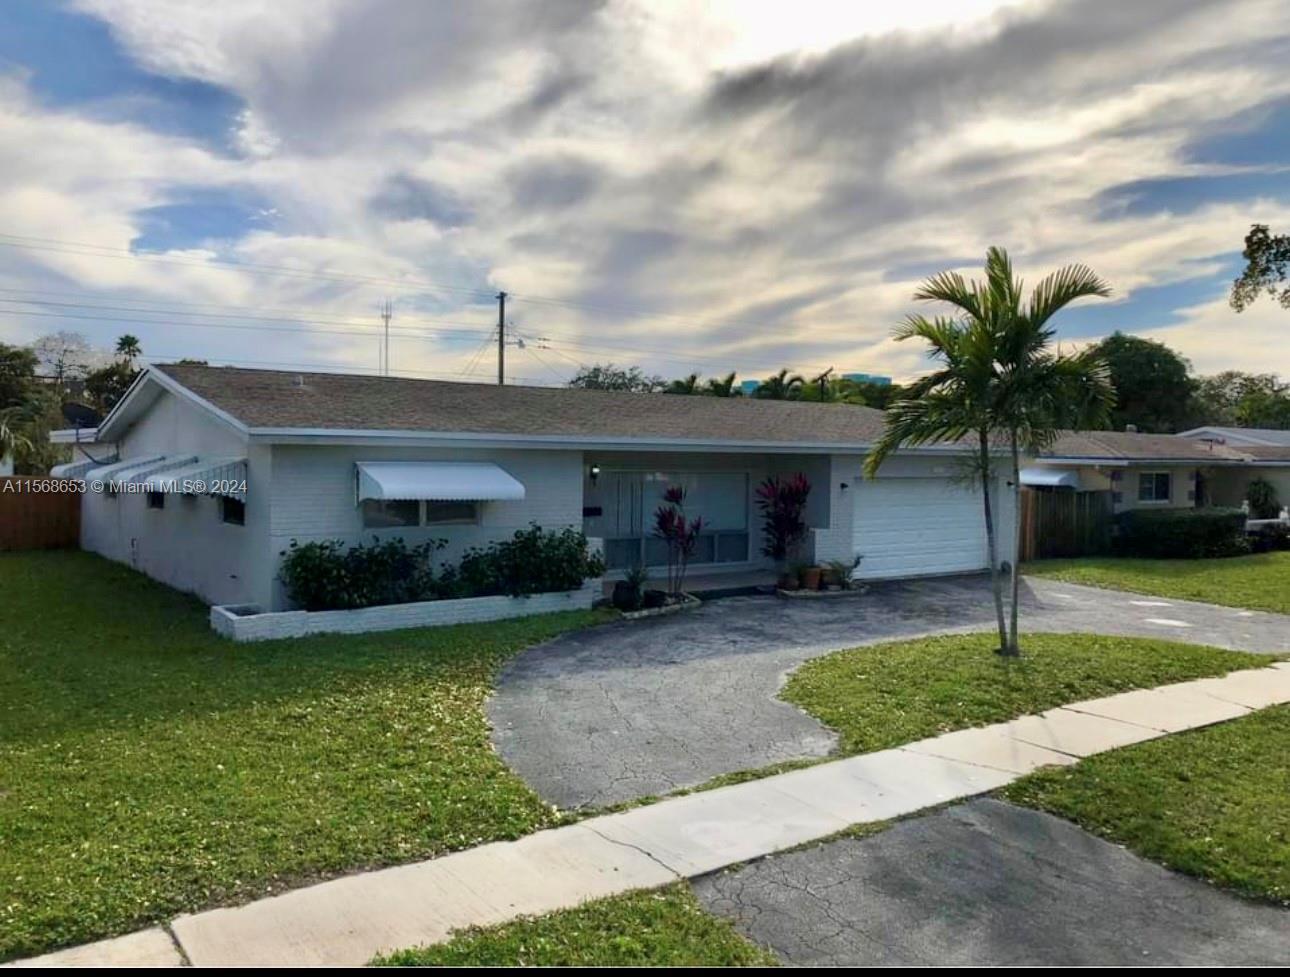 Photo of 4216 Adams St in Hollywood, FL